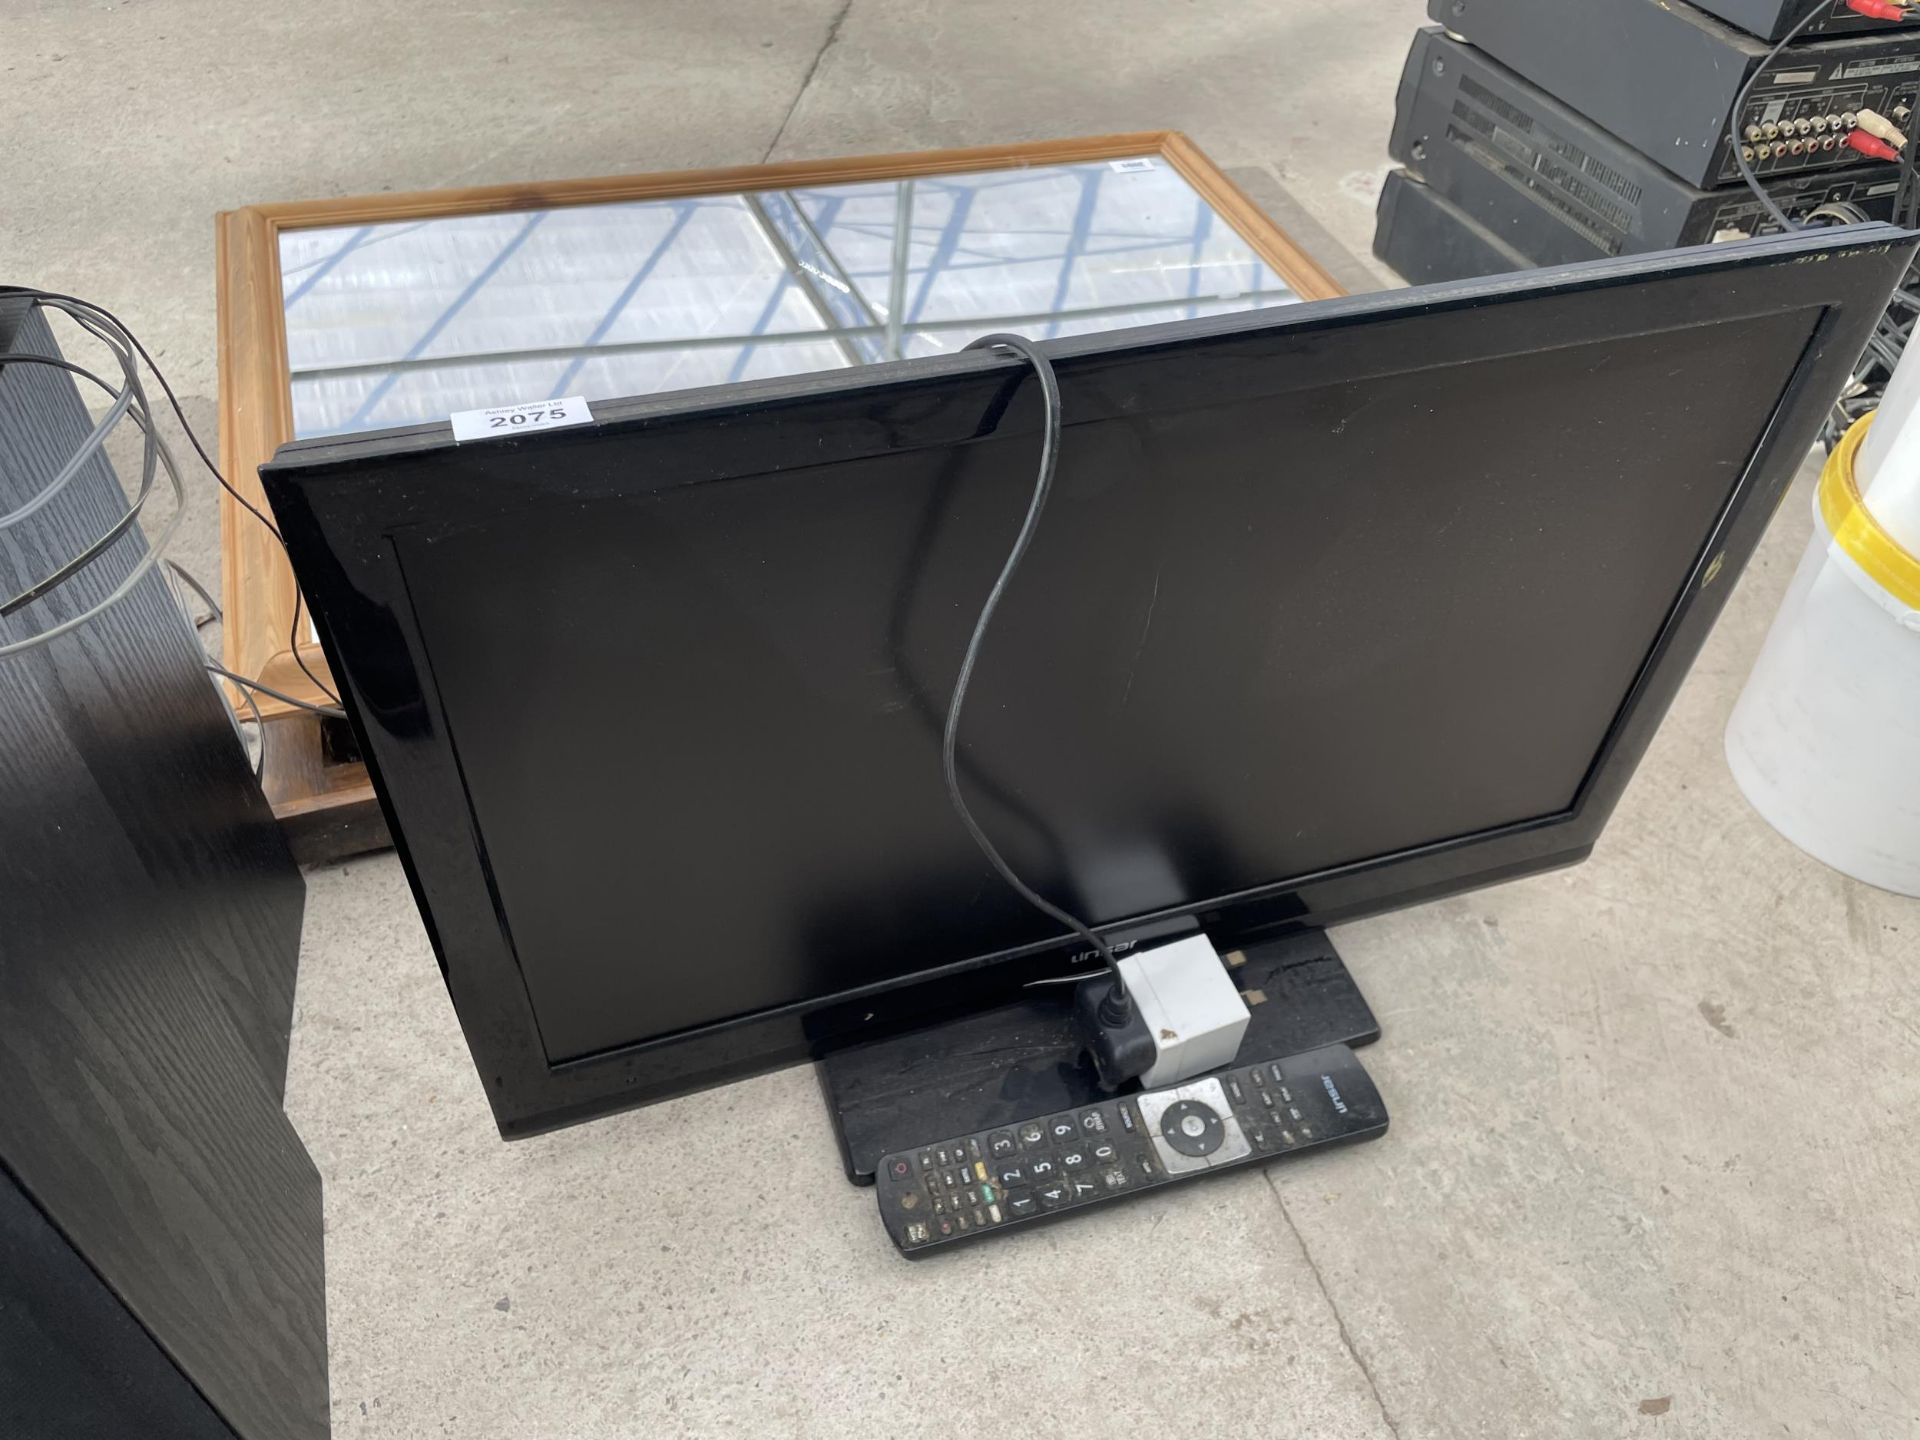 A LINSAR 24" TELEVISION WITH REMOTE CONTROL - Image 2 of 2